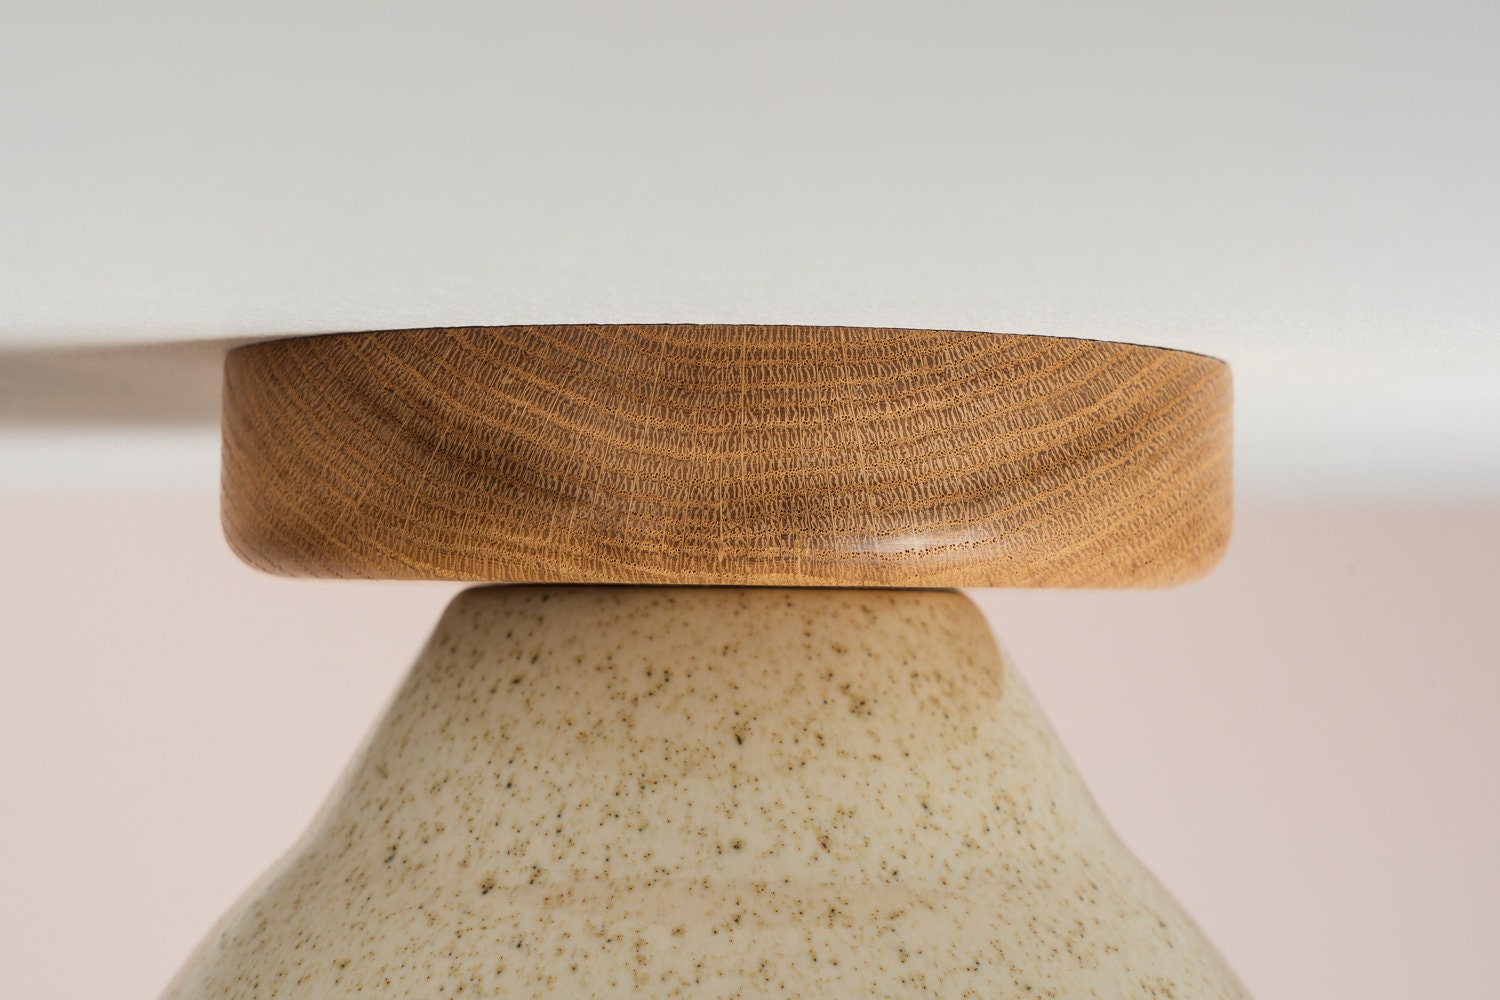 Element flush mount ceiling light in ceramic and oak with a speckled cream glaze by StudioHaran